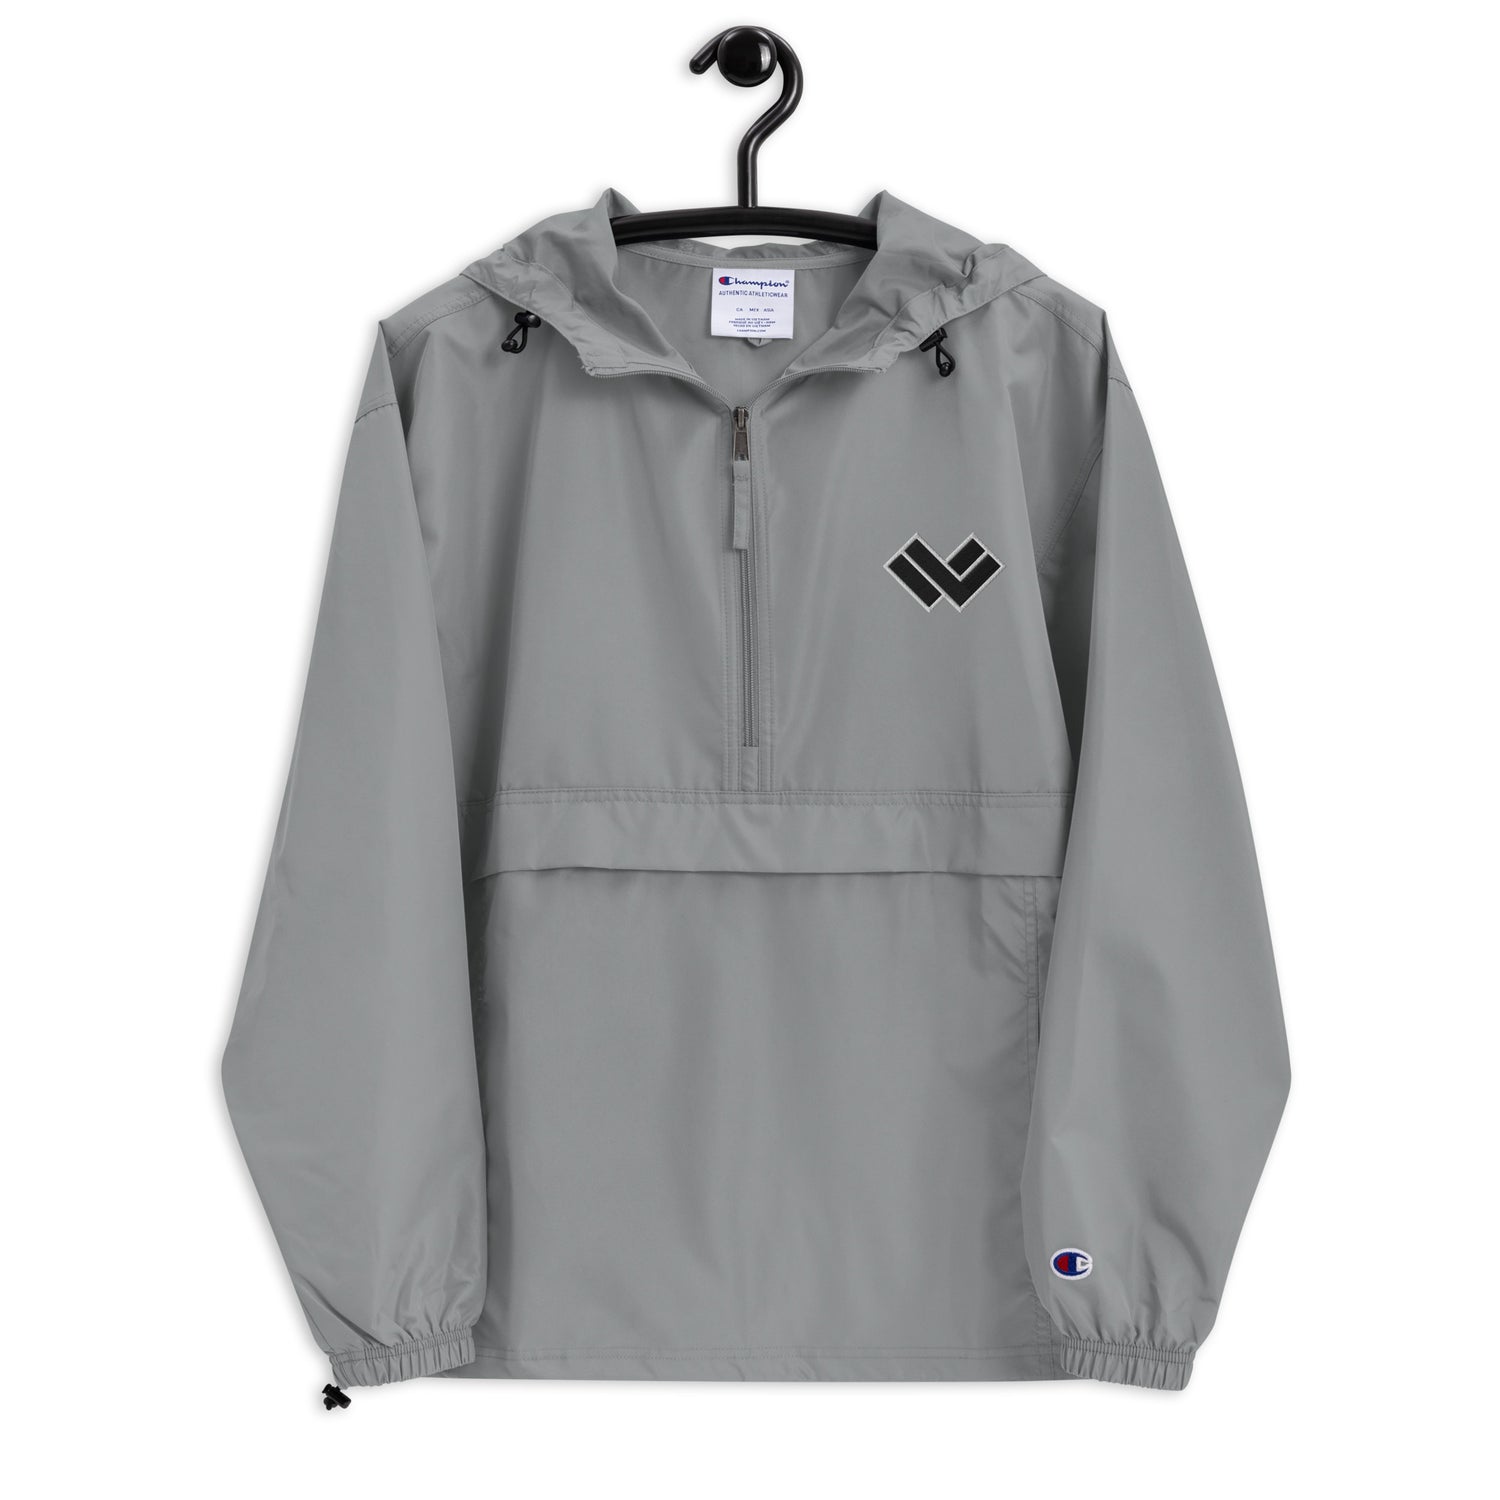 Women's “Lax World x Champion” Cradle Multi-shaded Packable Lacrosse Jacket - Grphite Front 